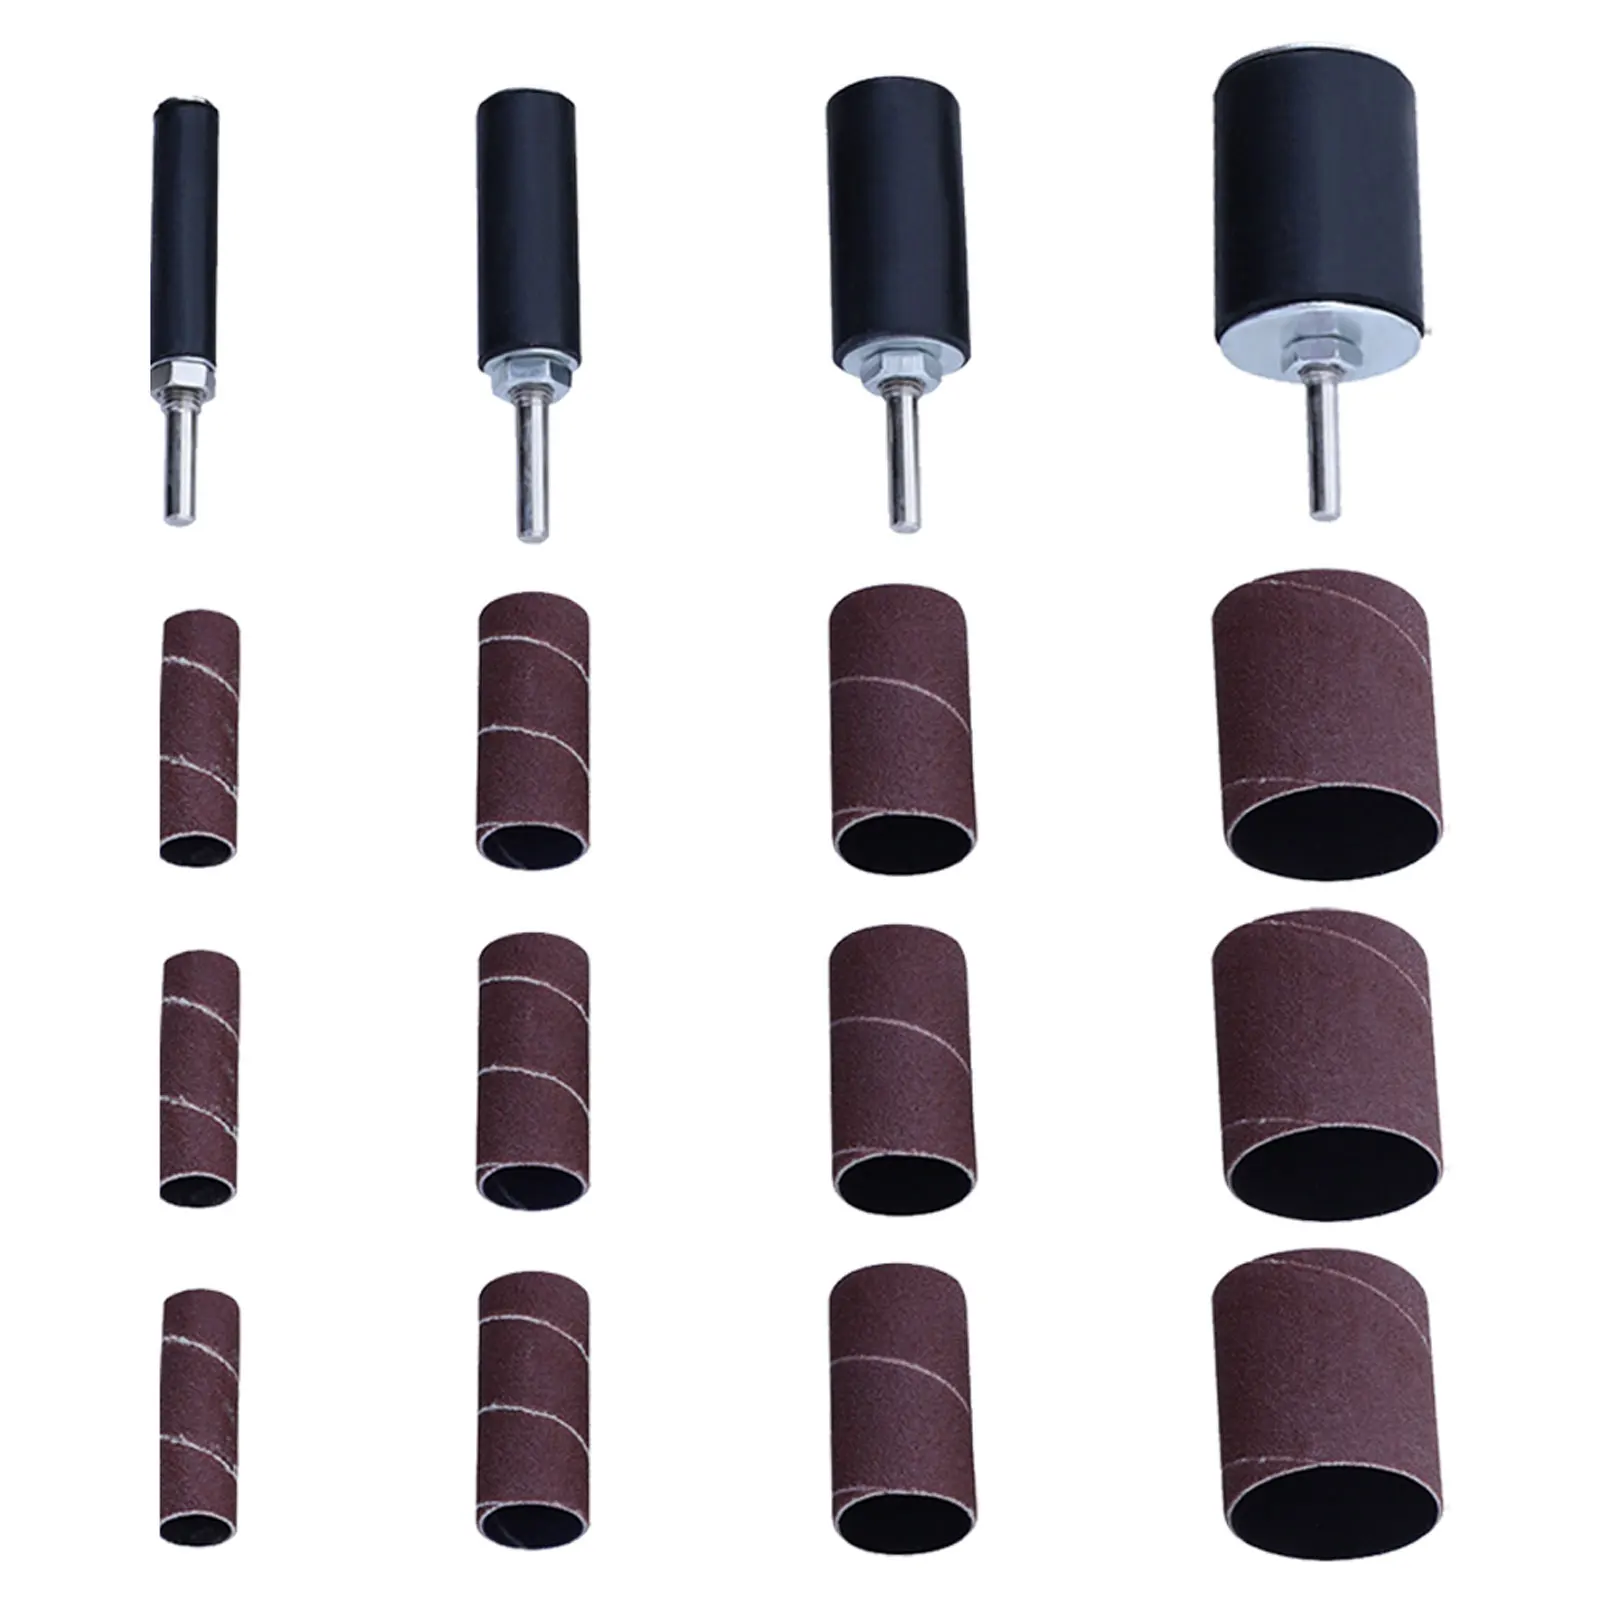 

16pcs Bands Mandrels Woodworking With Sleeves Polishing Buffing For Drill Sanding Drum Set Rotary Tools Universal Grinding DIY